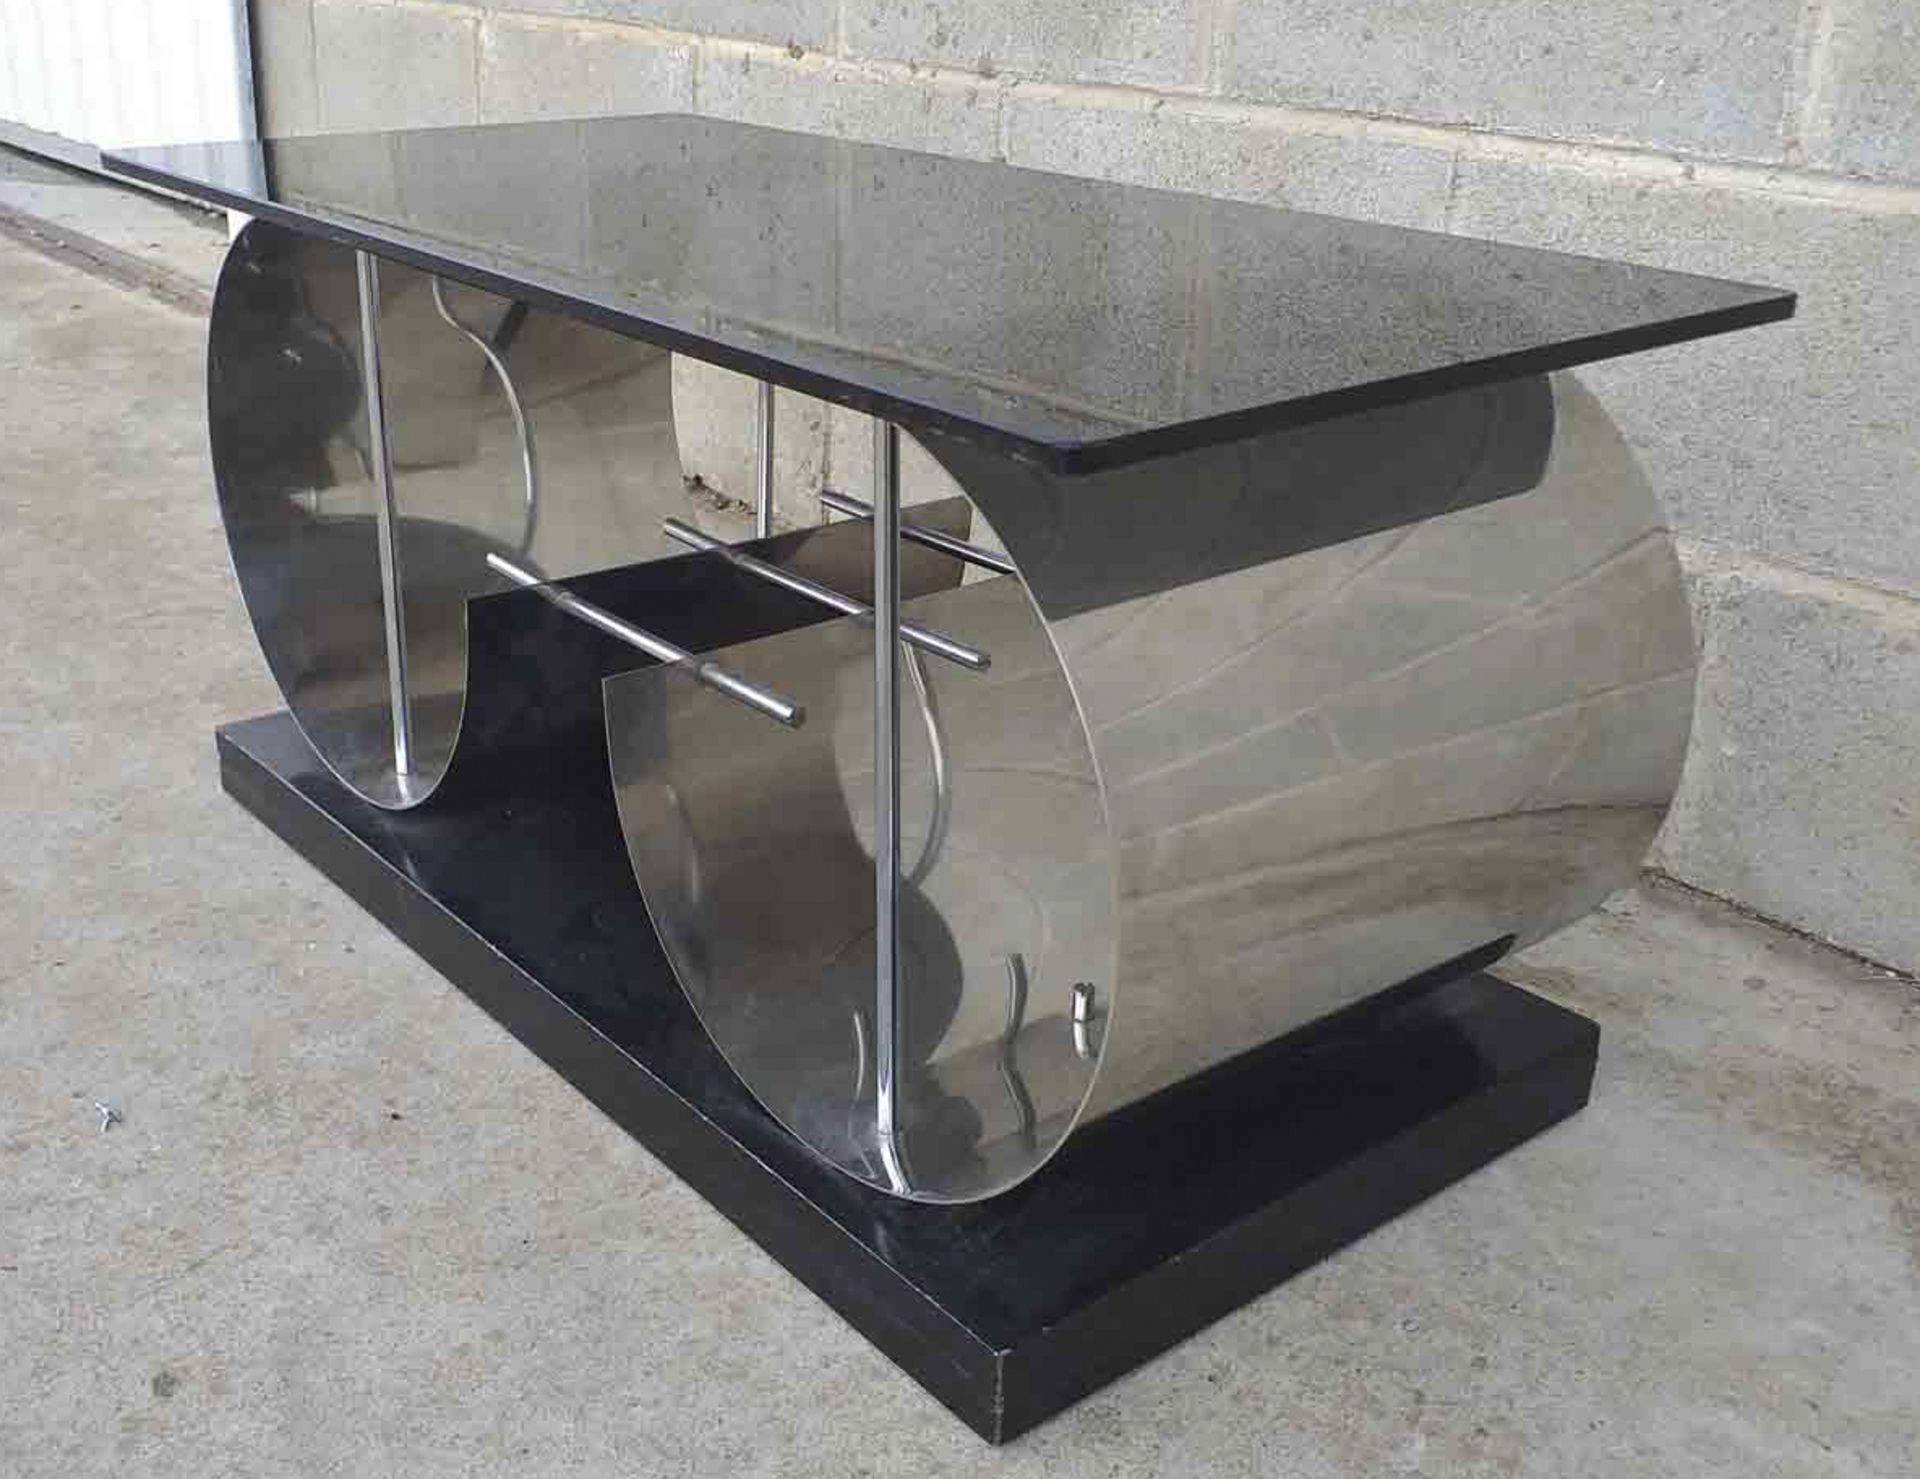 Important Italian Art Deco sideboard table in black marble and polished steel, 1950s - 1960s - Image 3 of 4